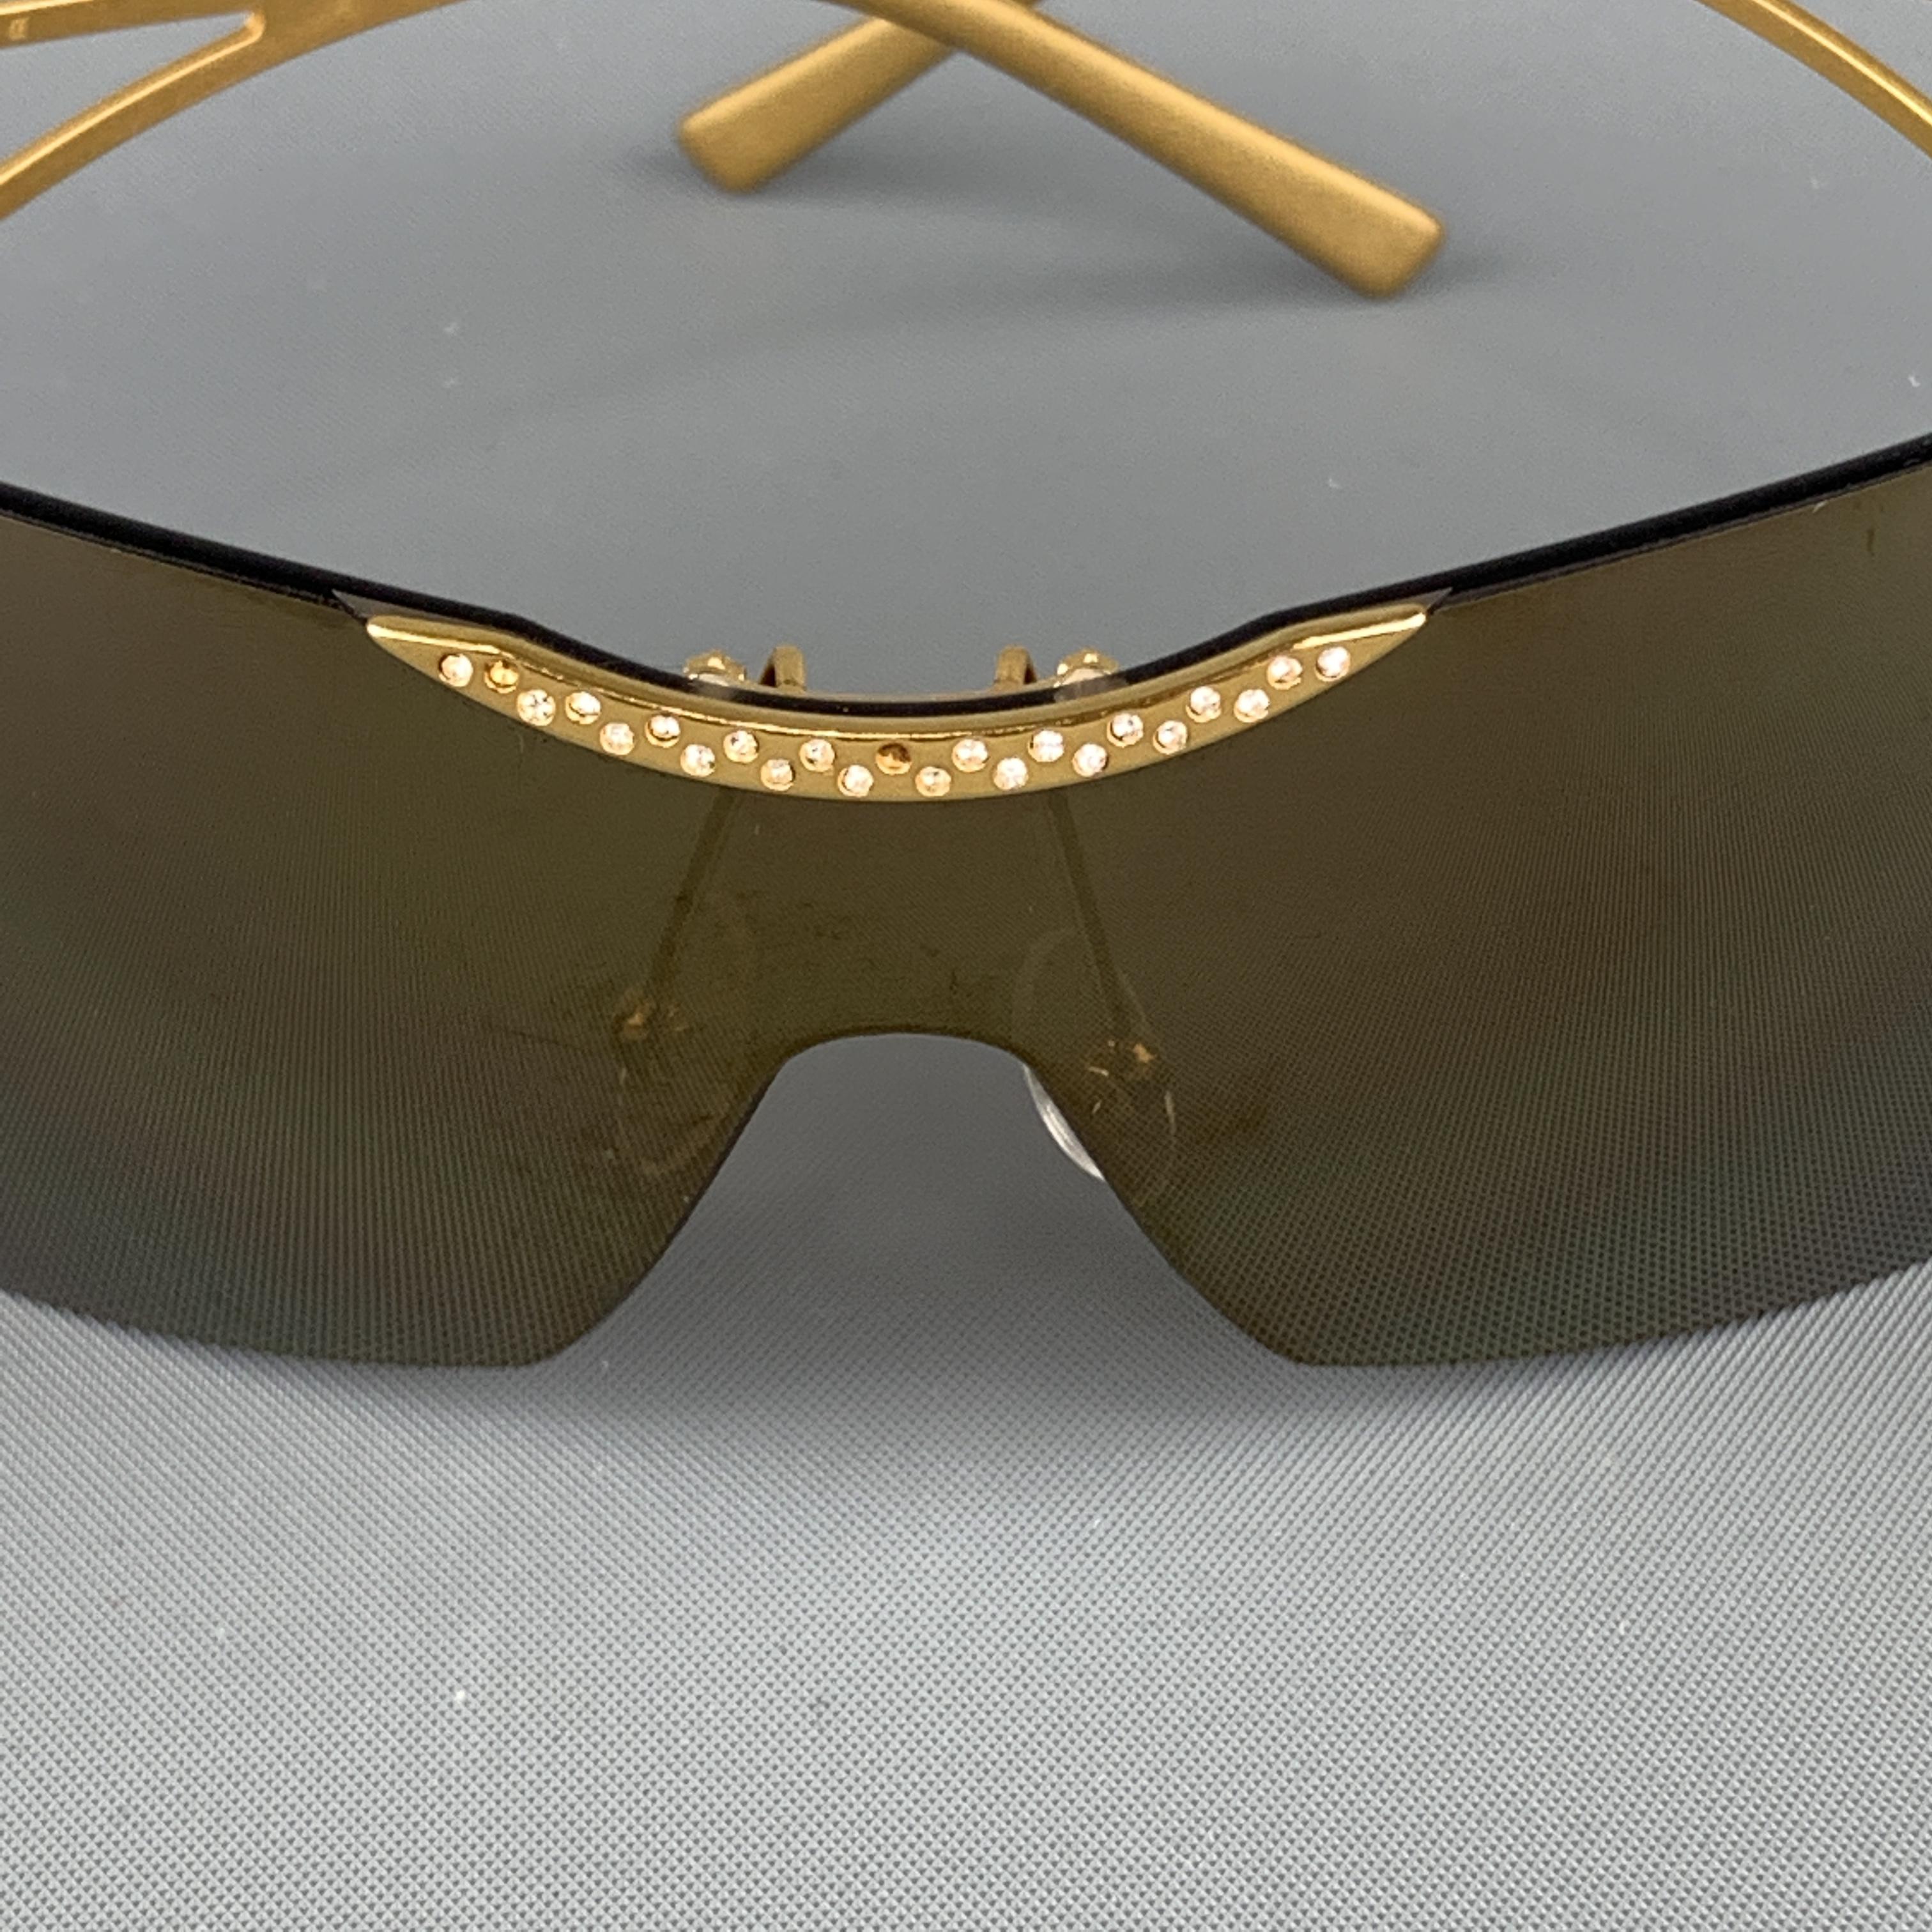 VALENTINO shield sunglasses come in gold tone metal with a metallic lens and rhinestone studded base. Wear throughout. Made in Italy.
 
Very Good Pre-Owned Condition.
Marked: 125 GOLD 0217 5RS 99 01
 
Width: 14 cm.
Height: 4 cm.